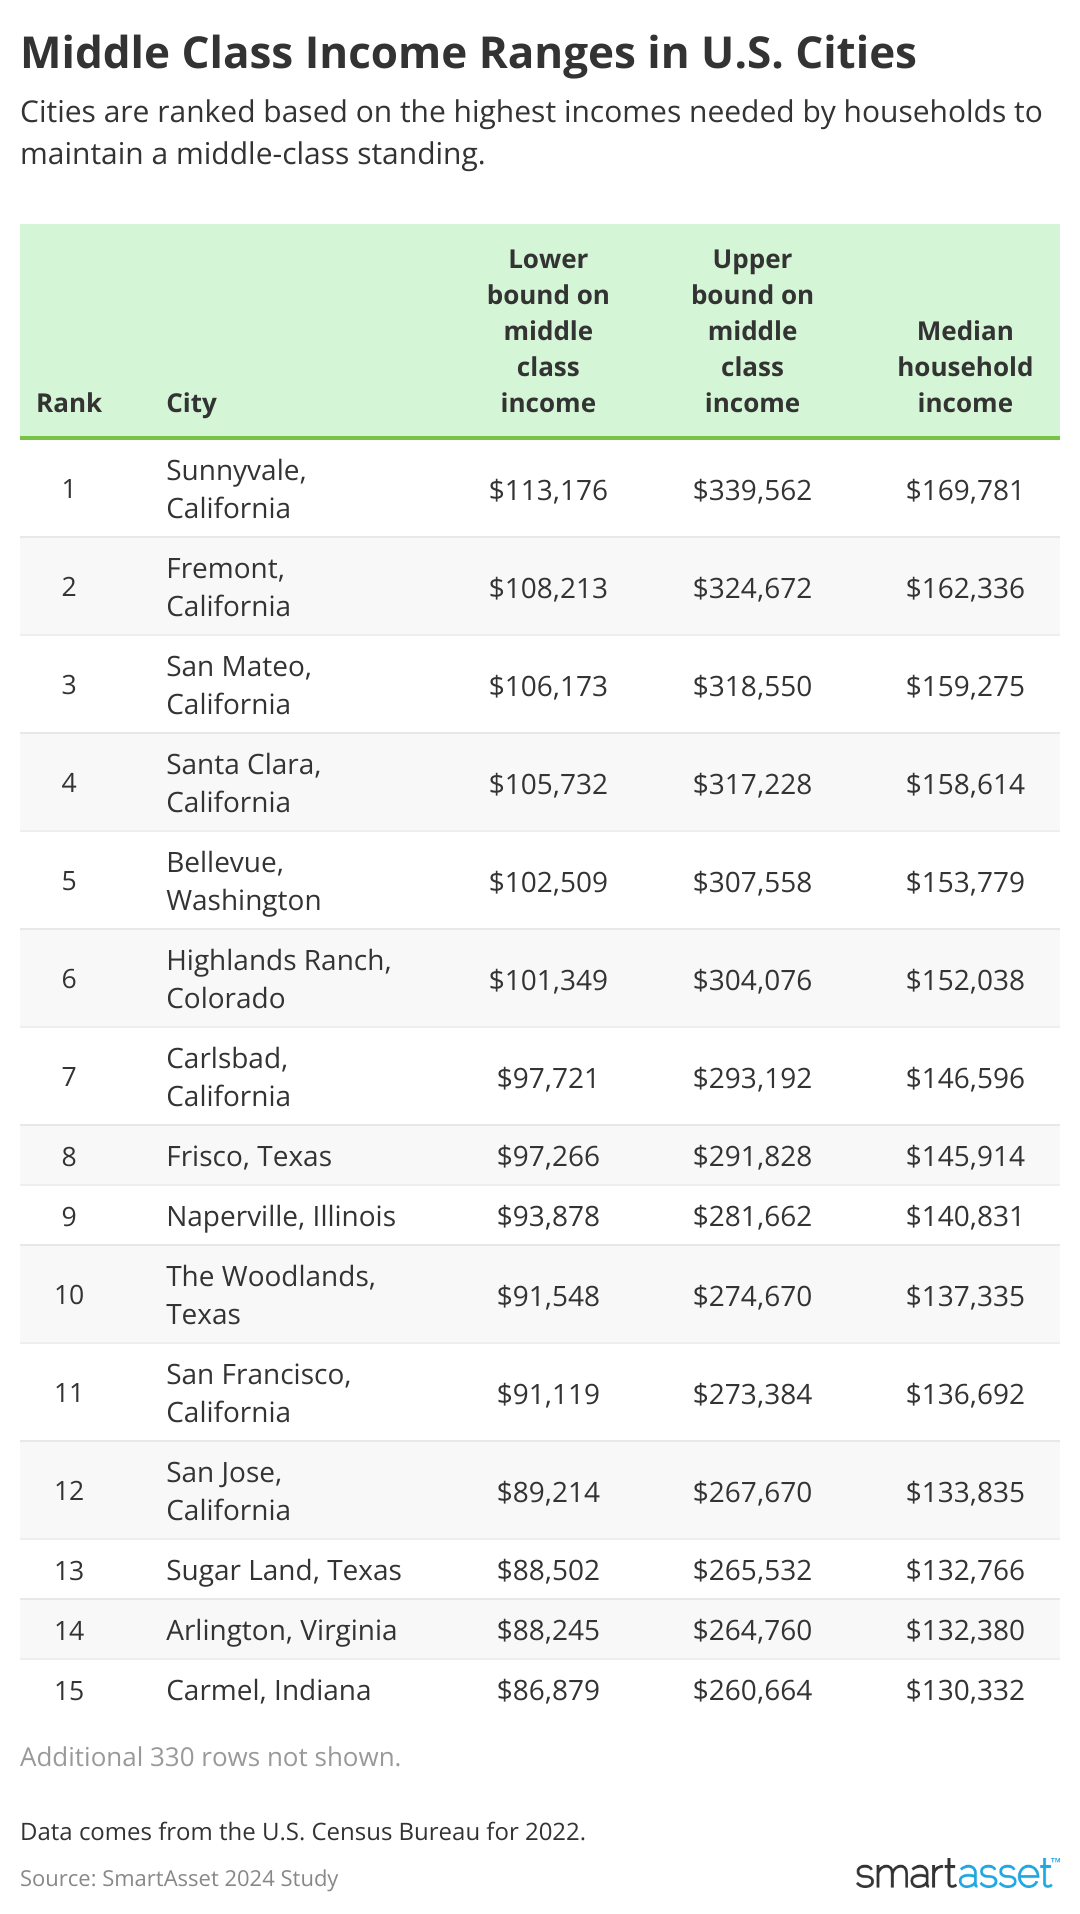 Table showing middle class income ranges in U.S. Cities.